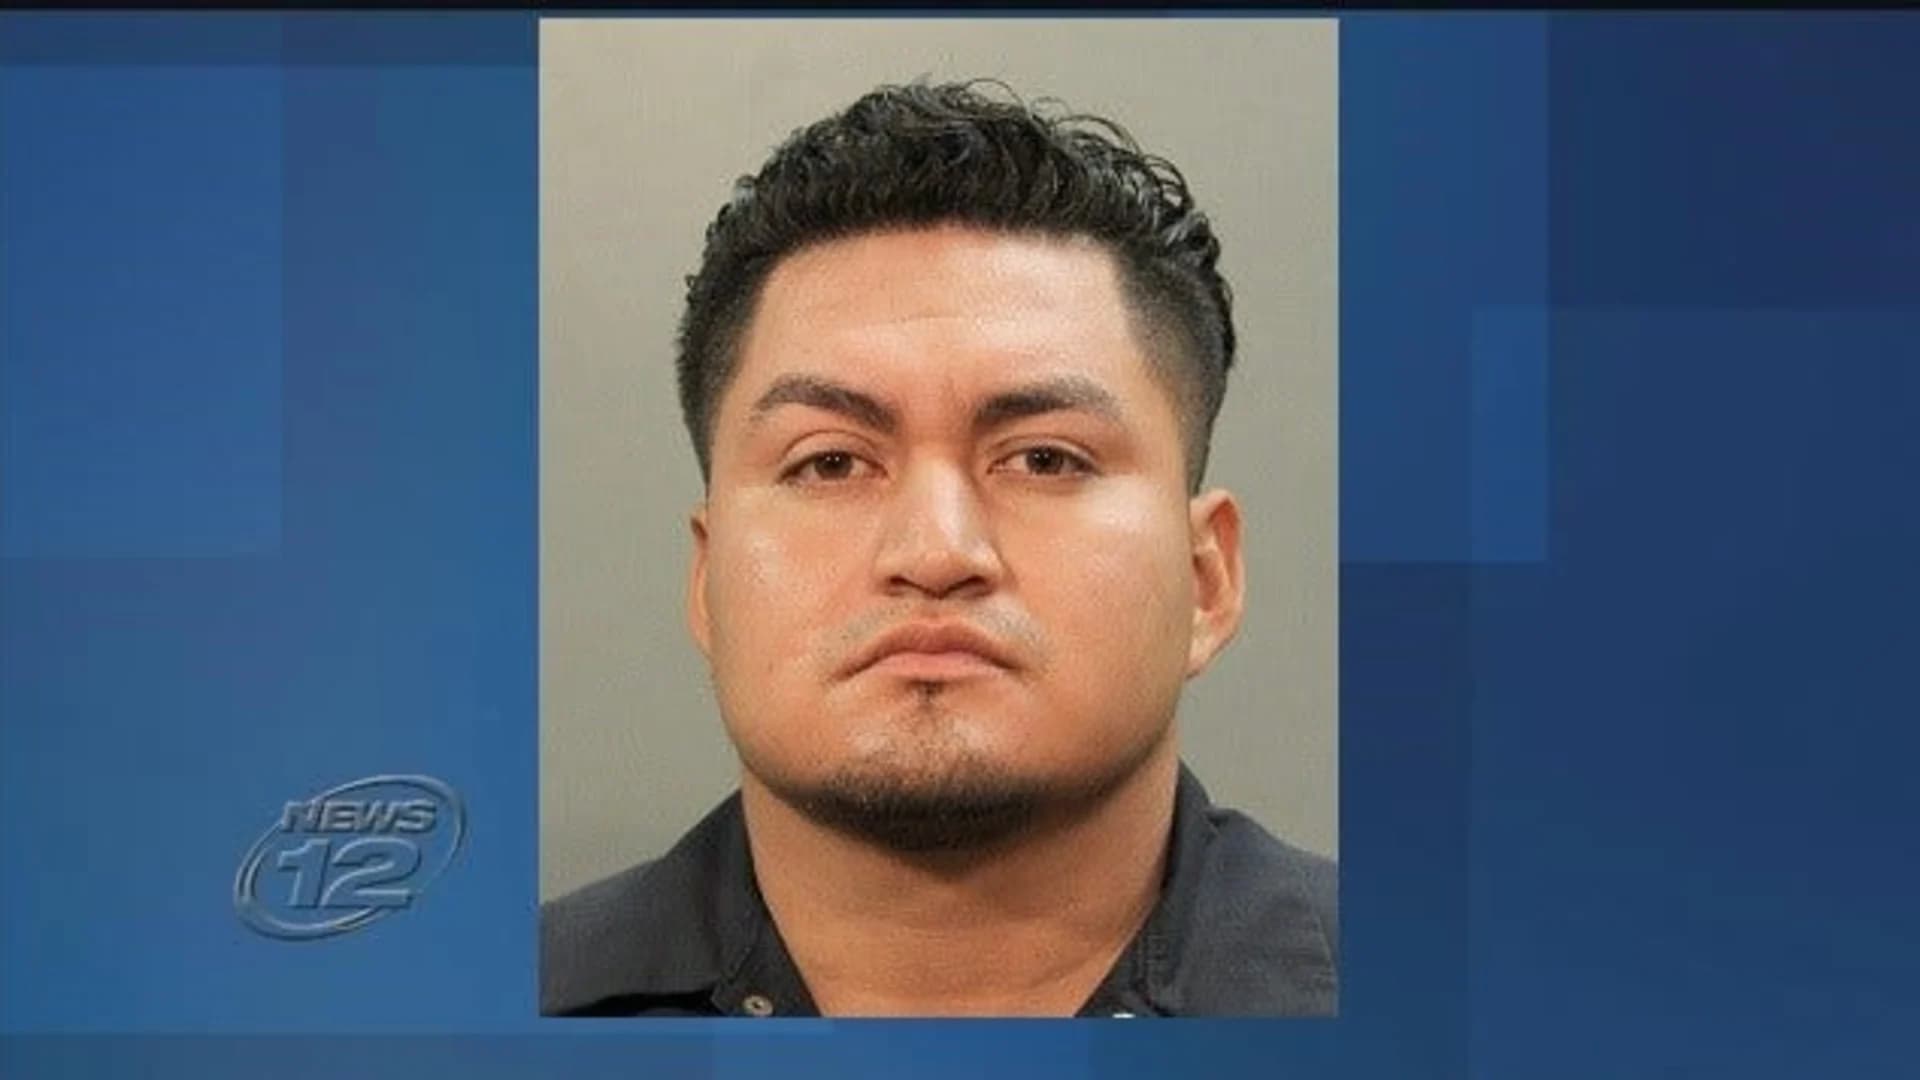 Police arrest man accused of knocking woman unconscious, raping her